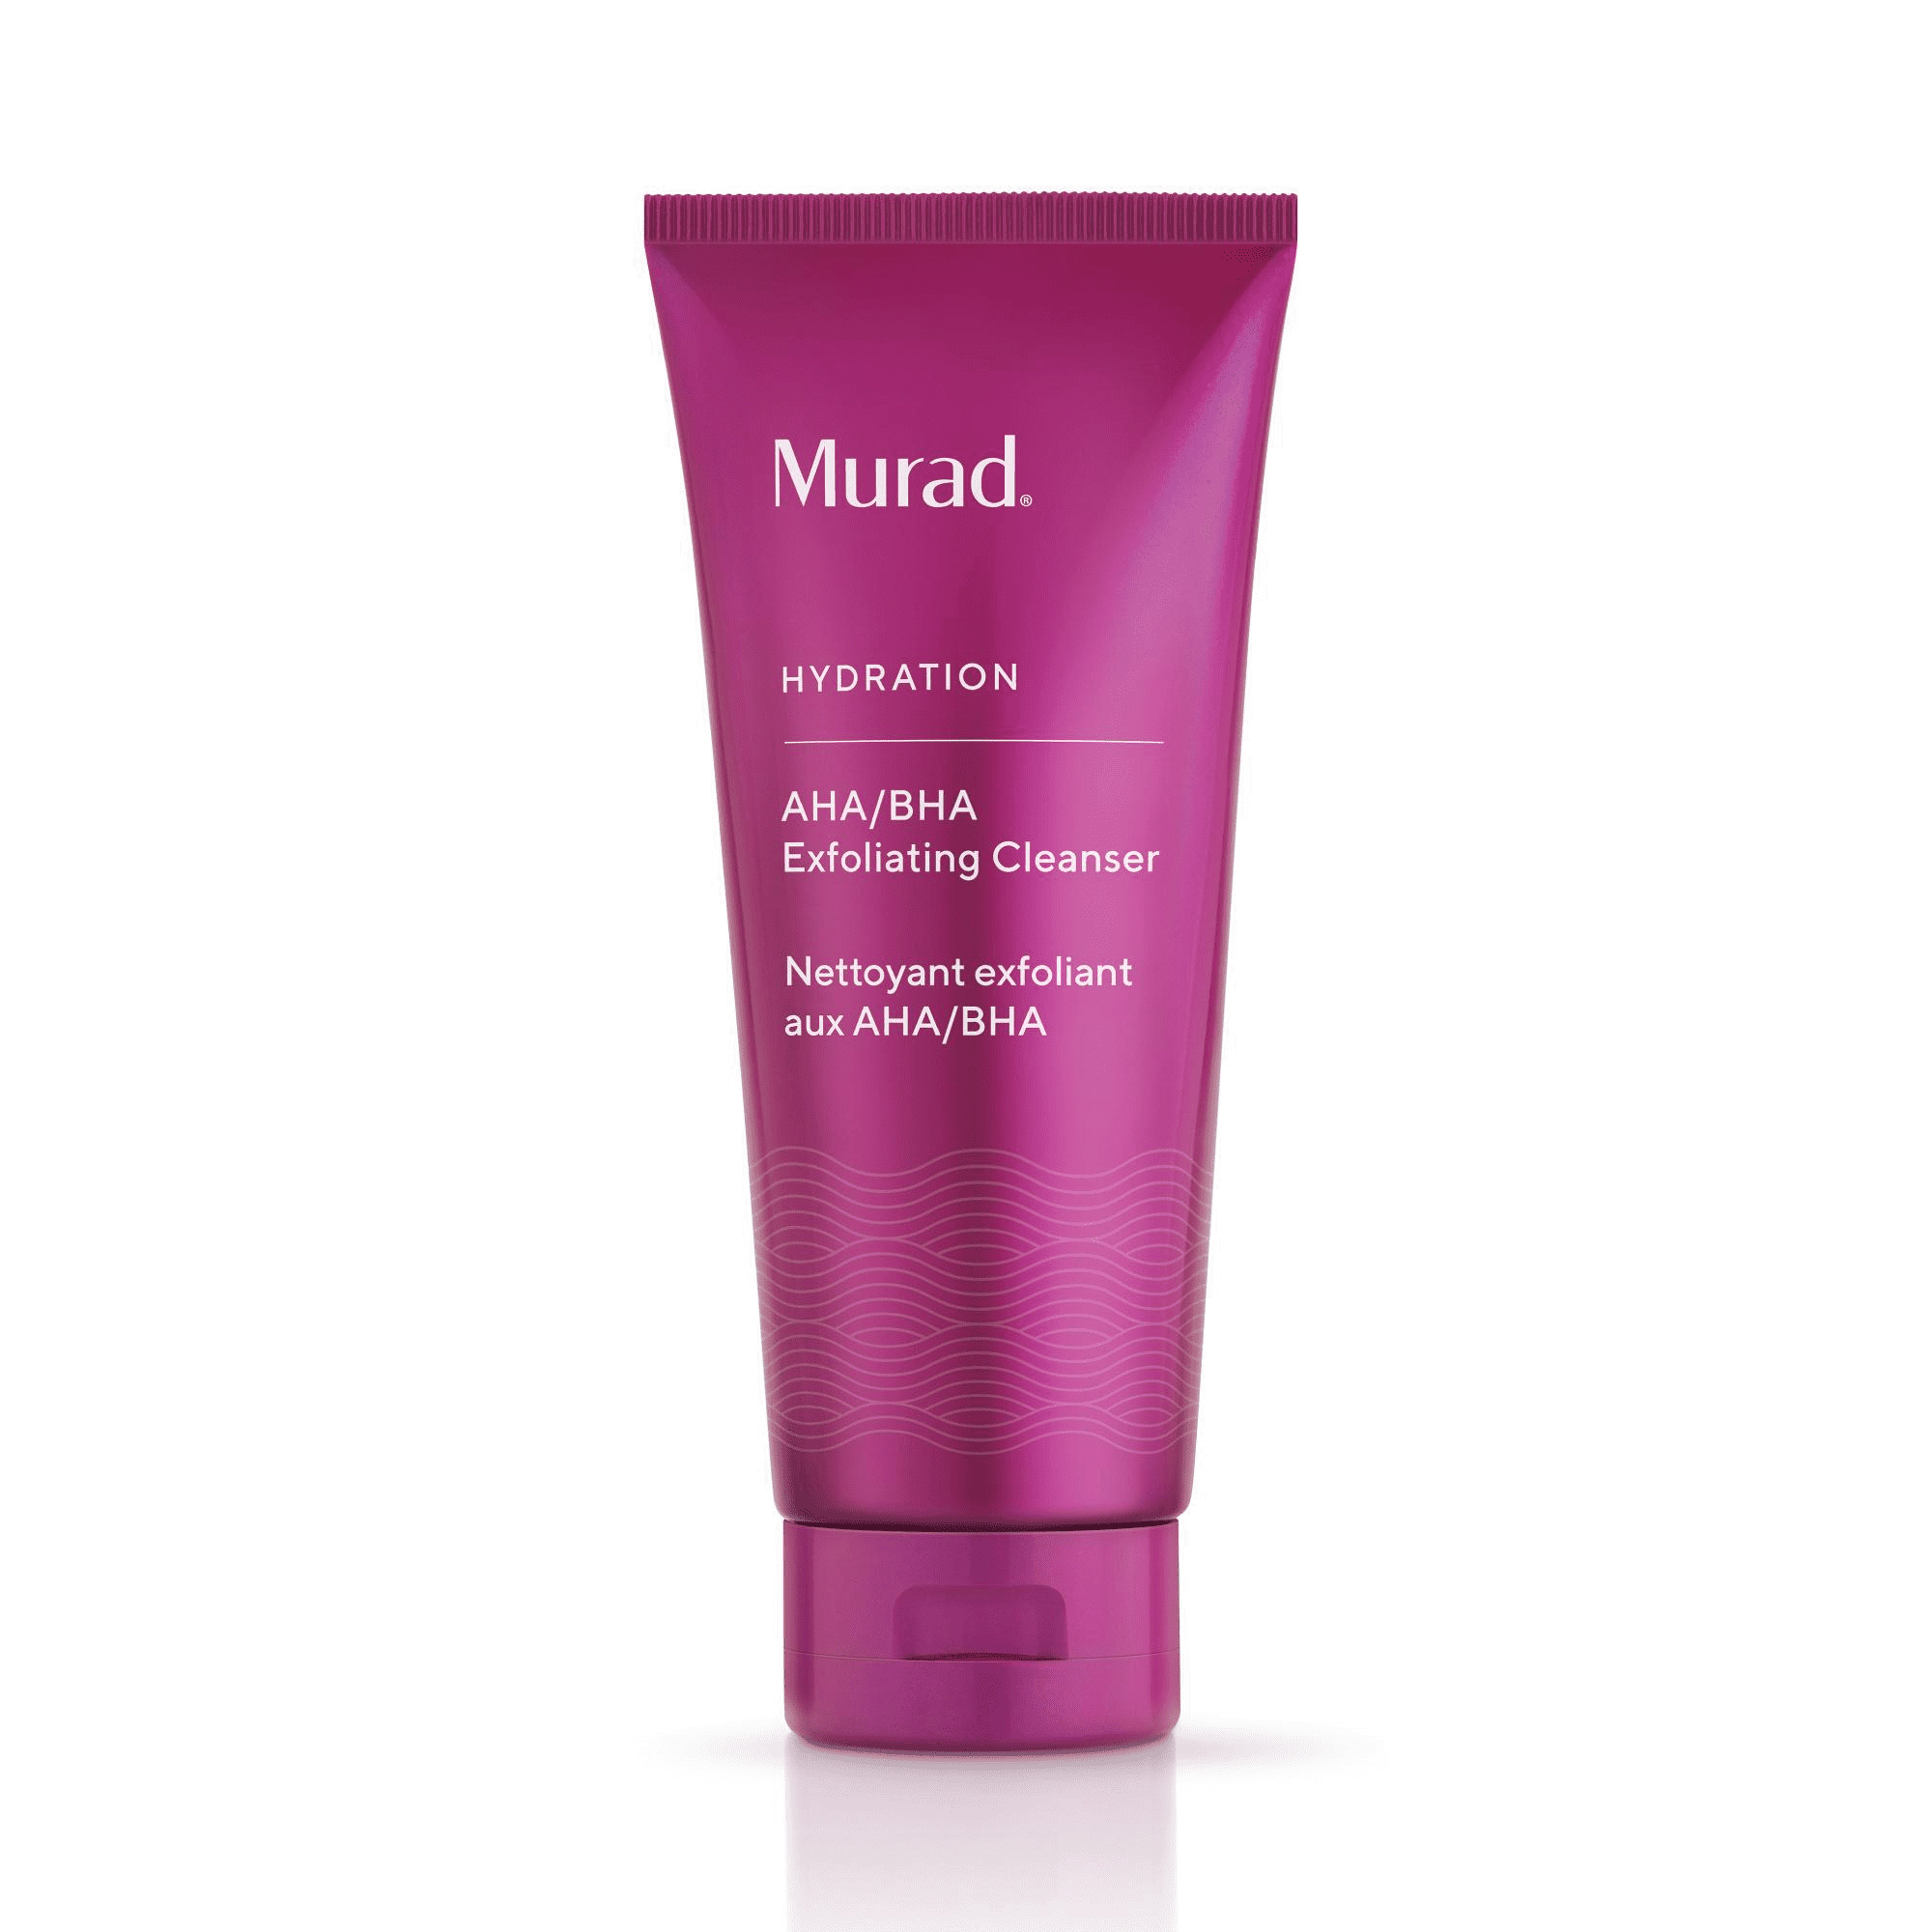 AHA/BHA Exfoliating Cleanser - The Perfect Products